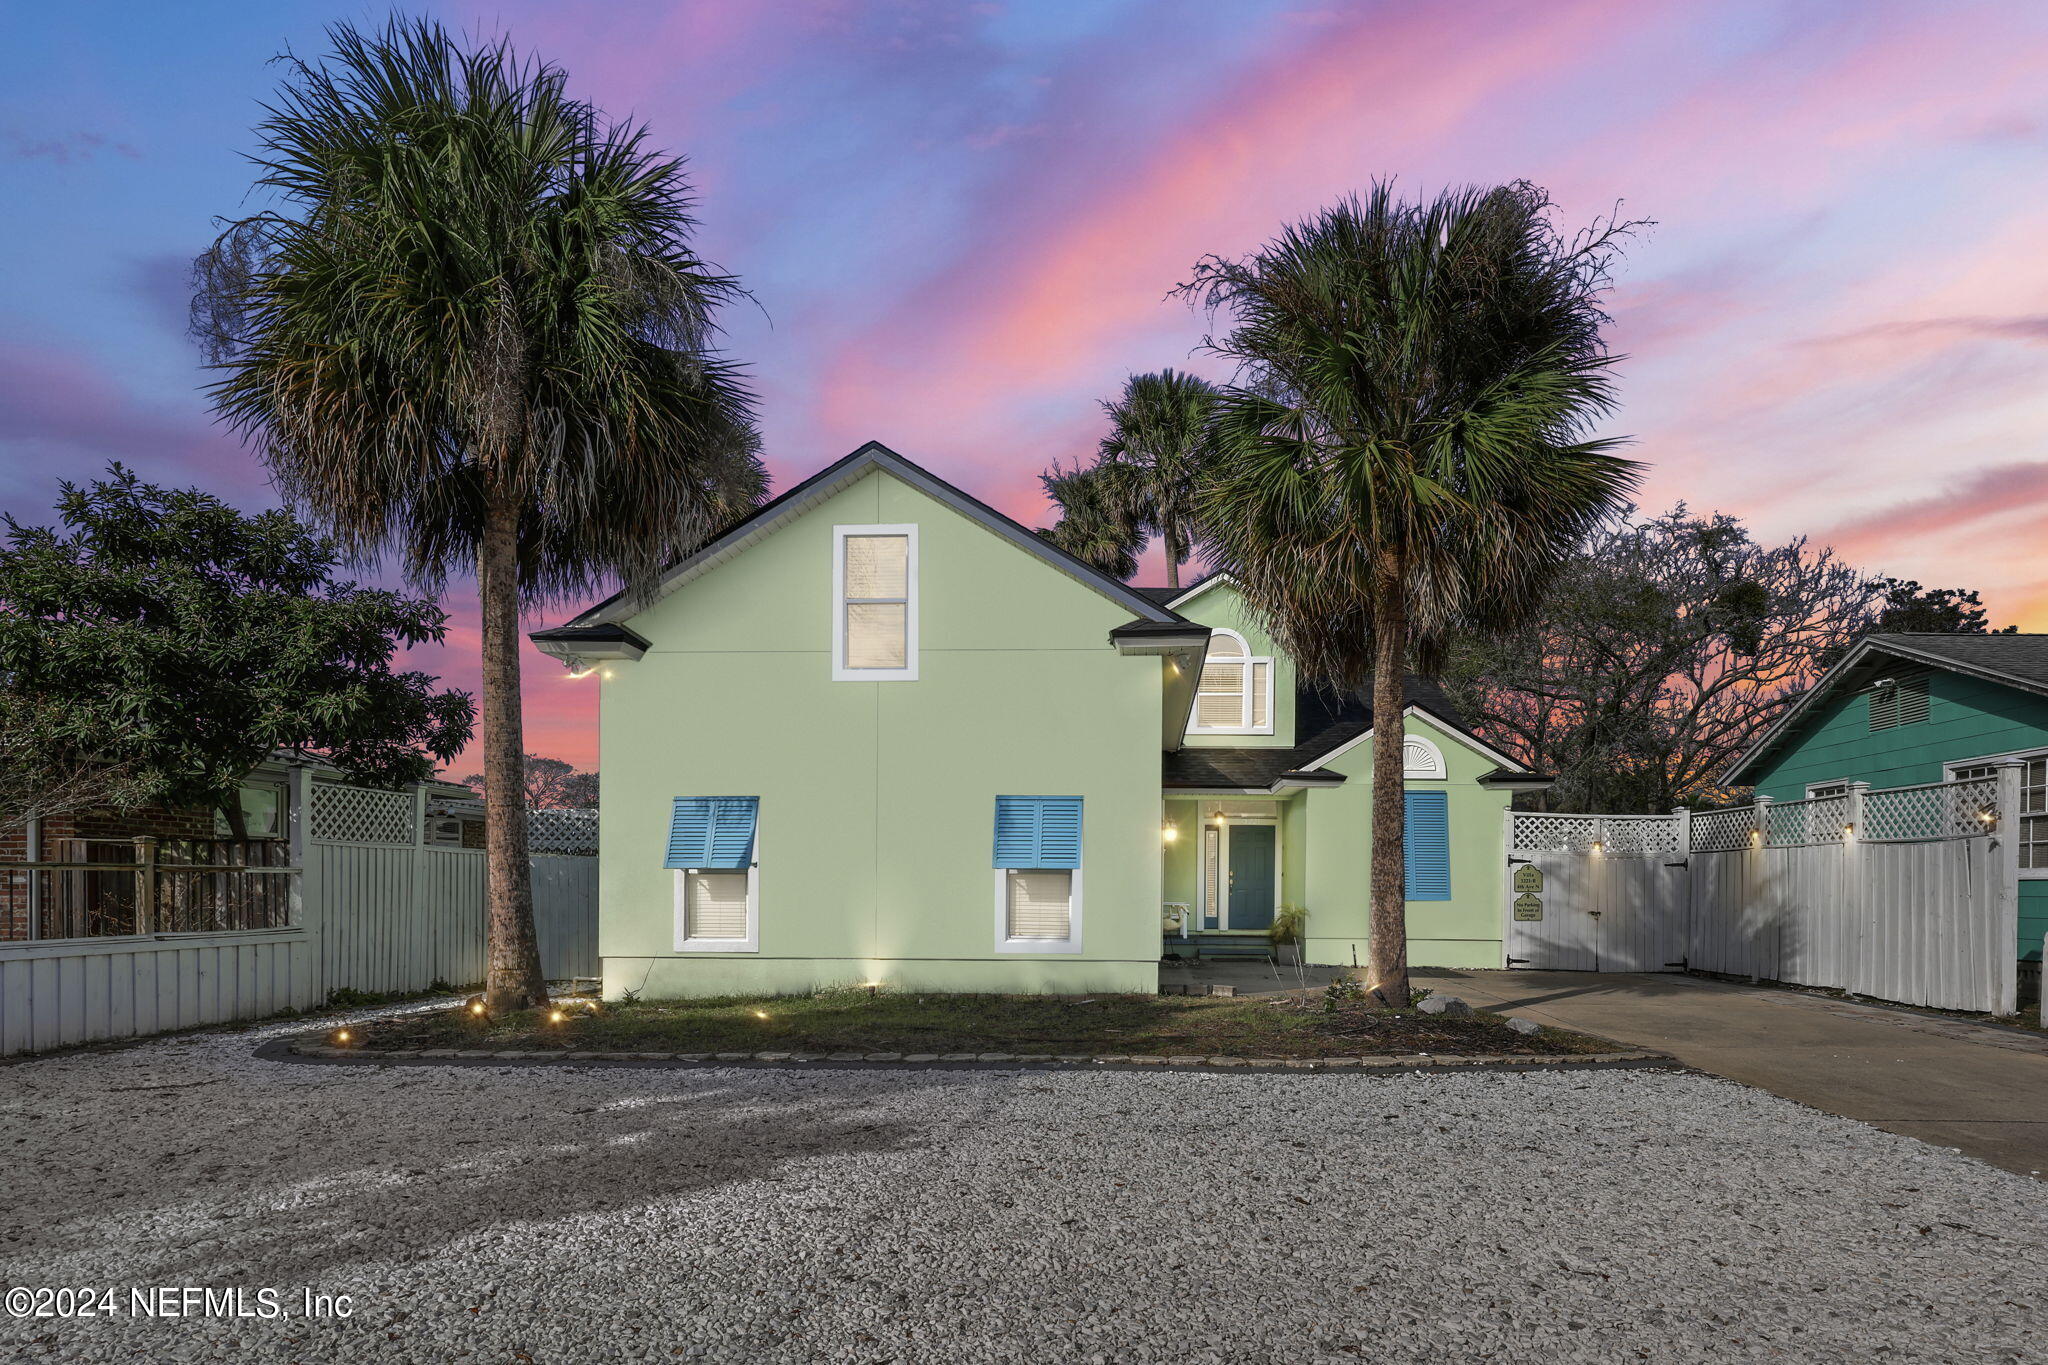 Jacksonville Beach, FL home for sale located at 1221 4TH Avenue N, Jacksonville Beach, FL 32250